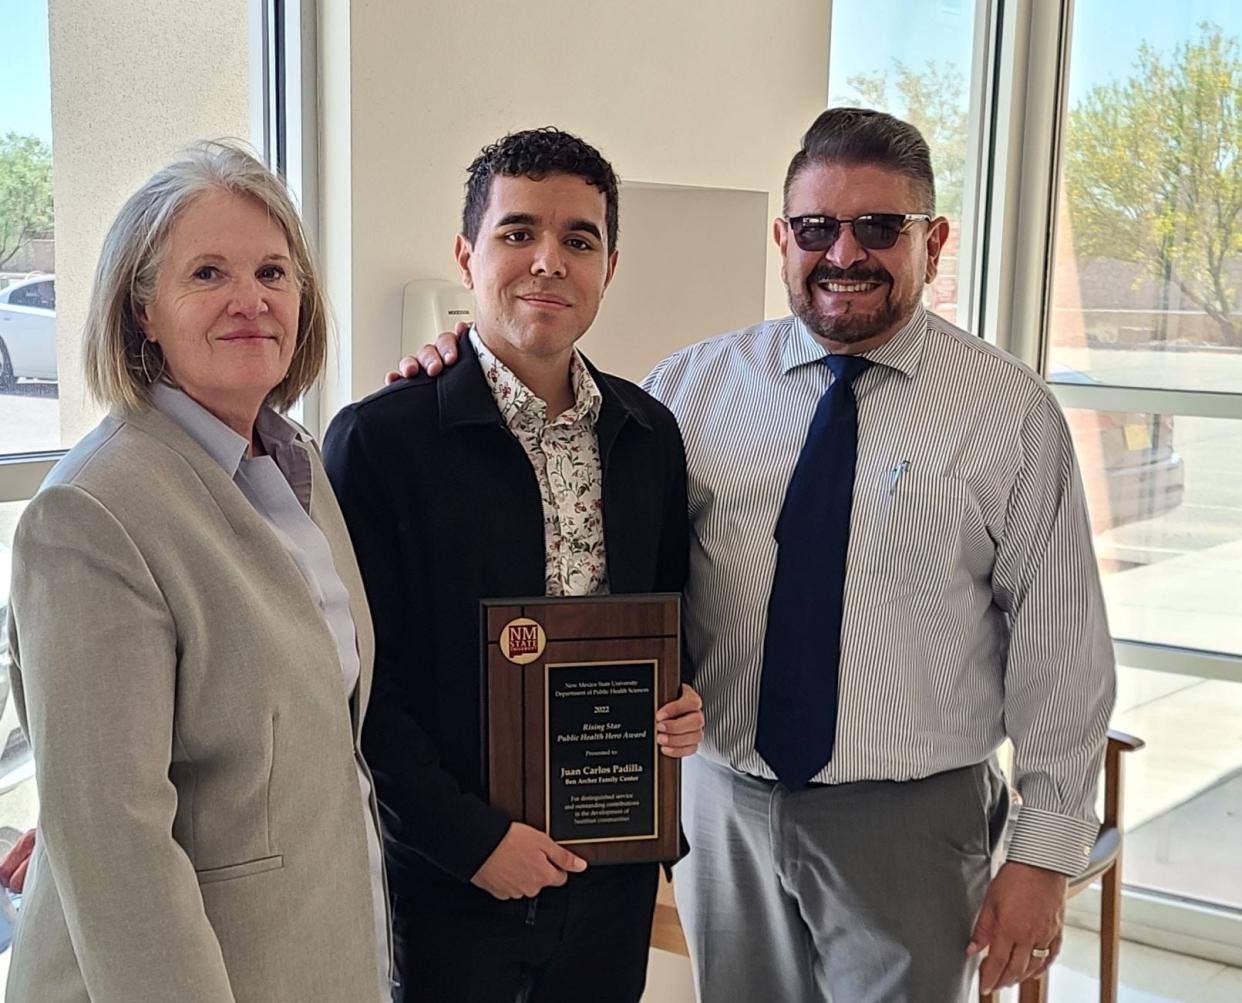 Juan Carlos Padilla of Ben Archer Health Center, center, receives the Rising Public Health Hero Award from New Mexico State University’s Department of Public Health Sciences. Padilla, an NMSU alumnus who recently earned a master’s degree in public health, stands with Frances Scappaticci, left, also of Ben Archer Health Center, and Héctor Luis Díaz, head of NMSU’s Department of Public Health Sciences.